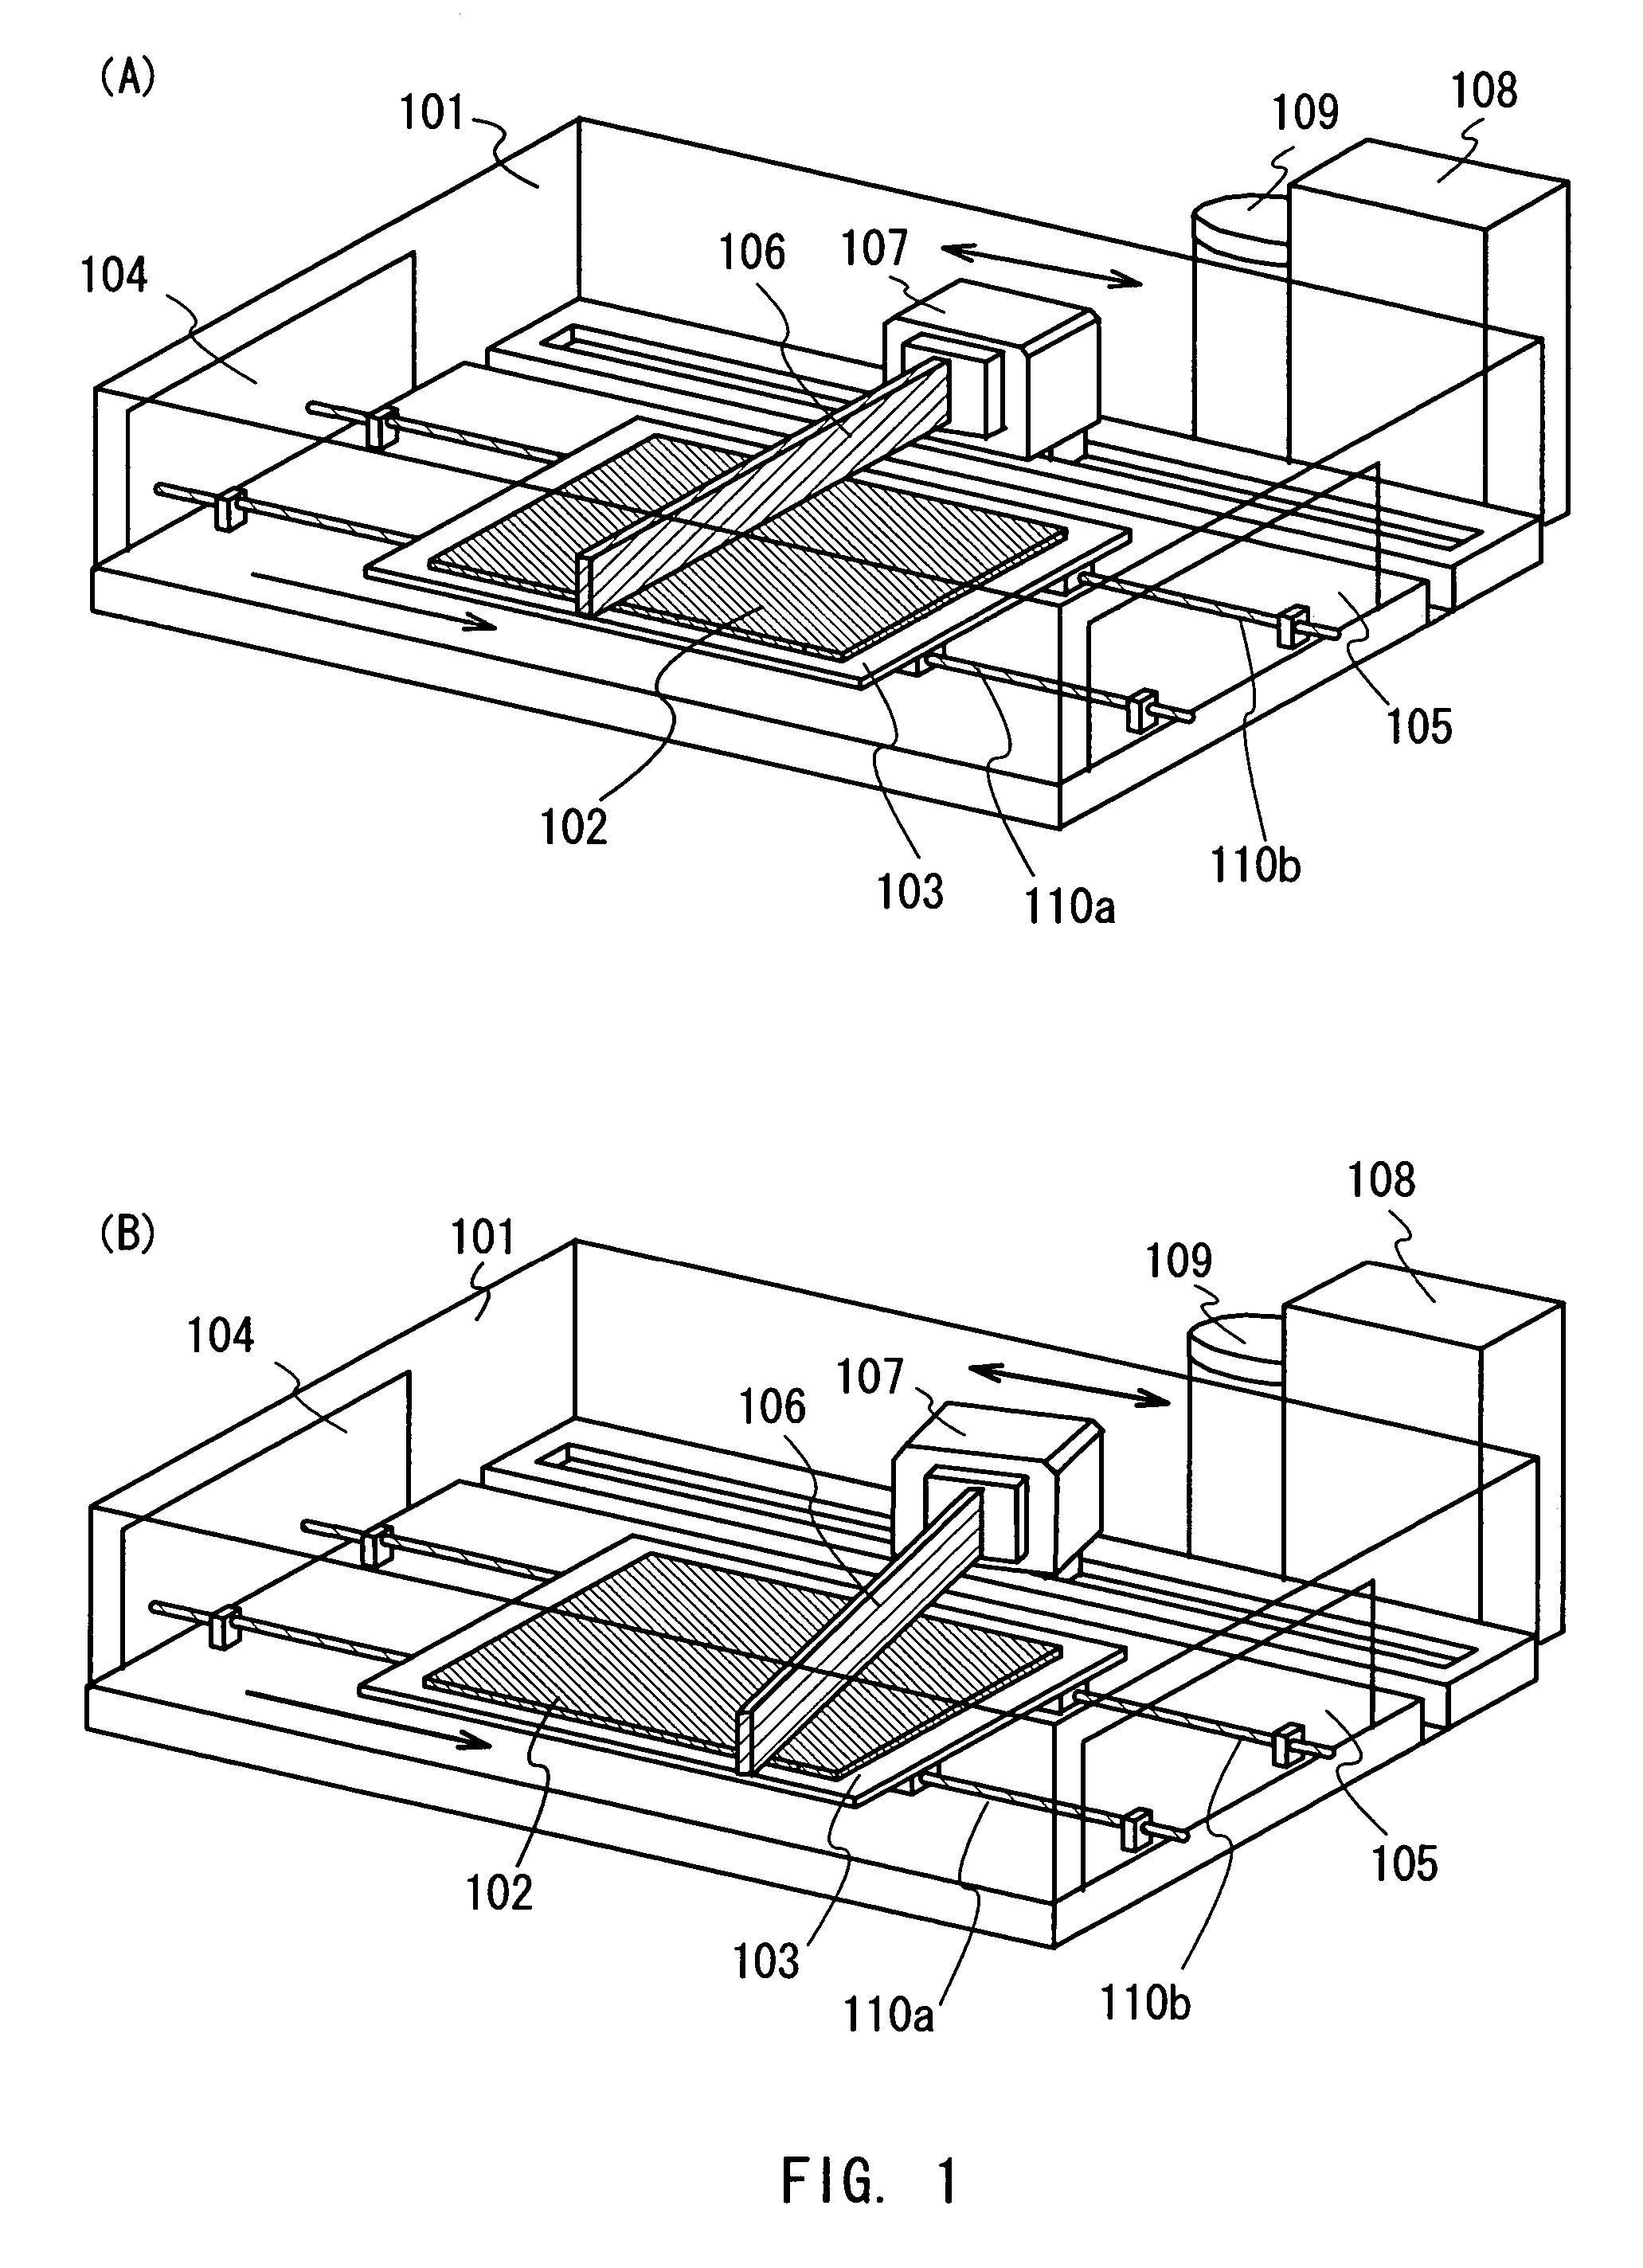 Method of manufacturing a display device using droplet emitting means